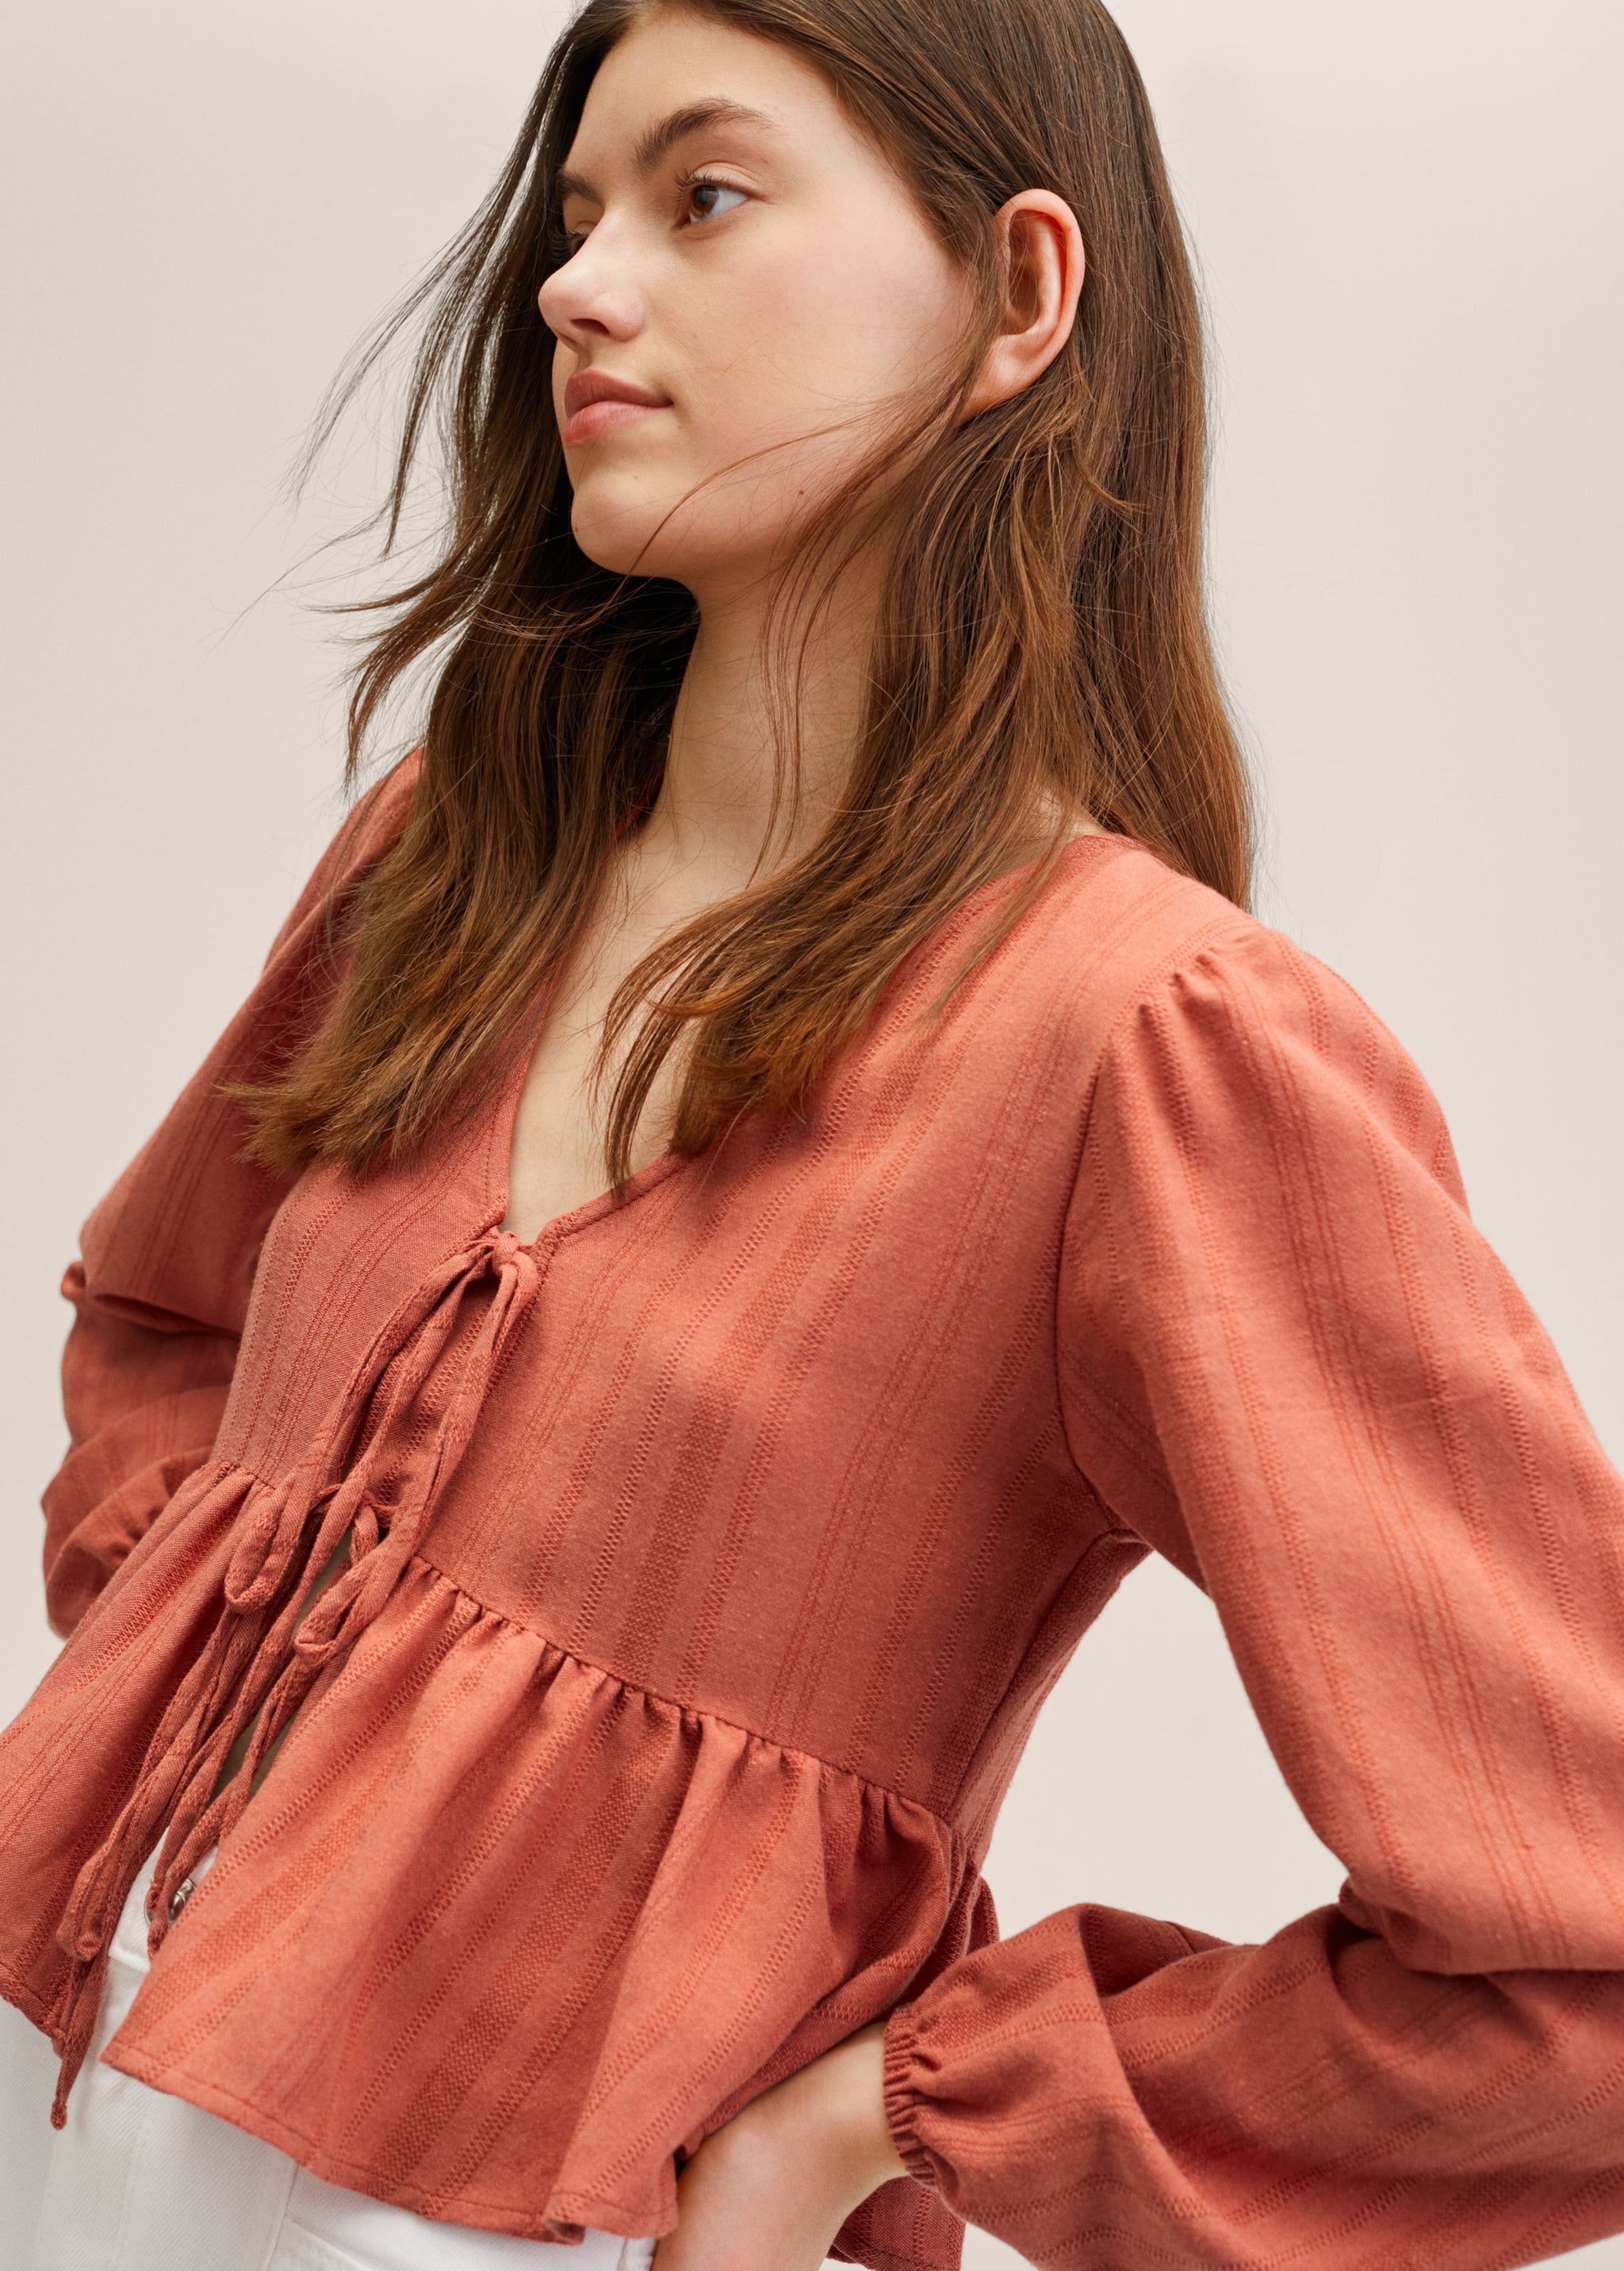 Flowy ruffle blouse - Details of the article 1